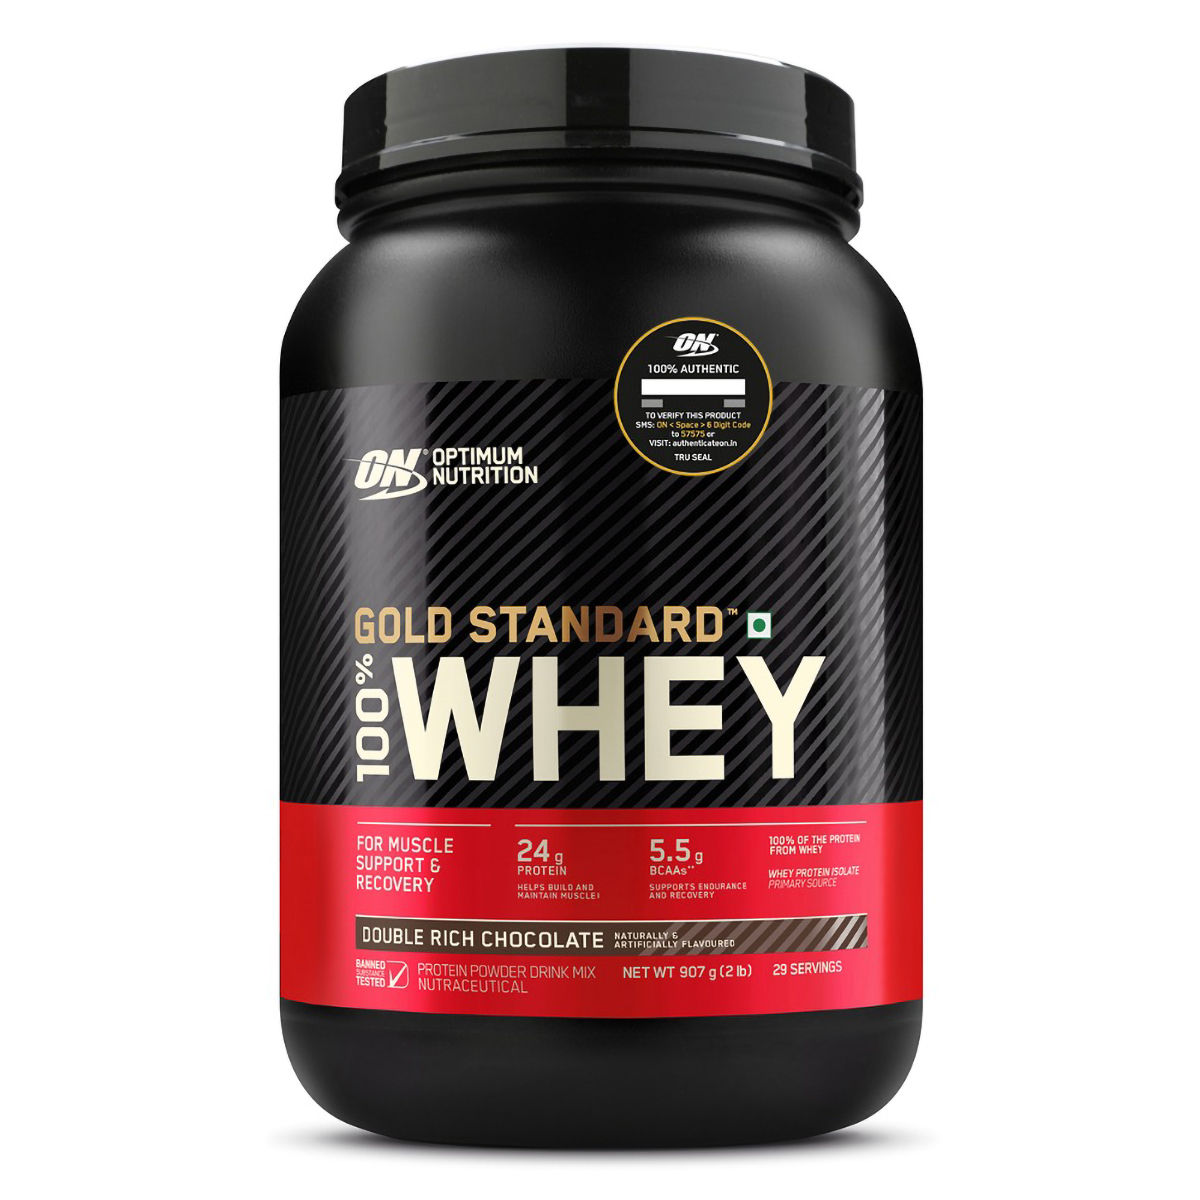 Optimum Nutrition (ON) Gold Standard 100% Whey Protein Double Rich Chocolate Flavour Powder, 2 lb, Pack of 1 